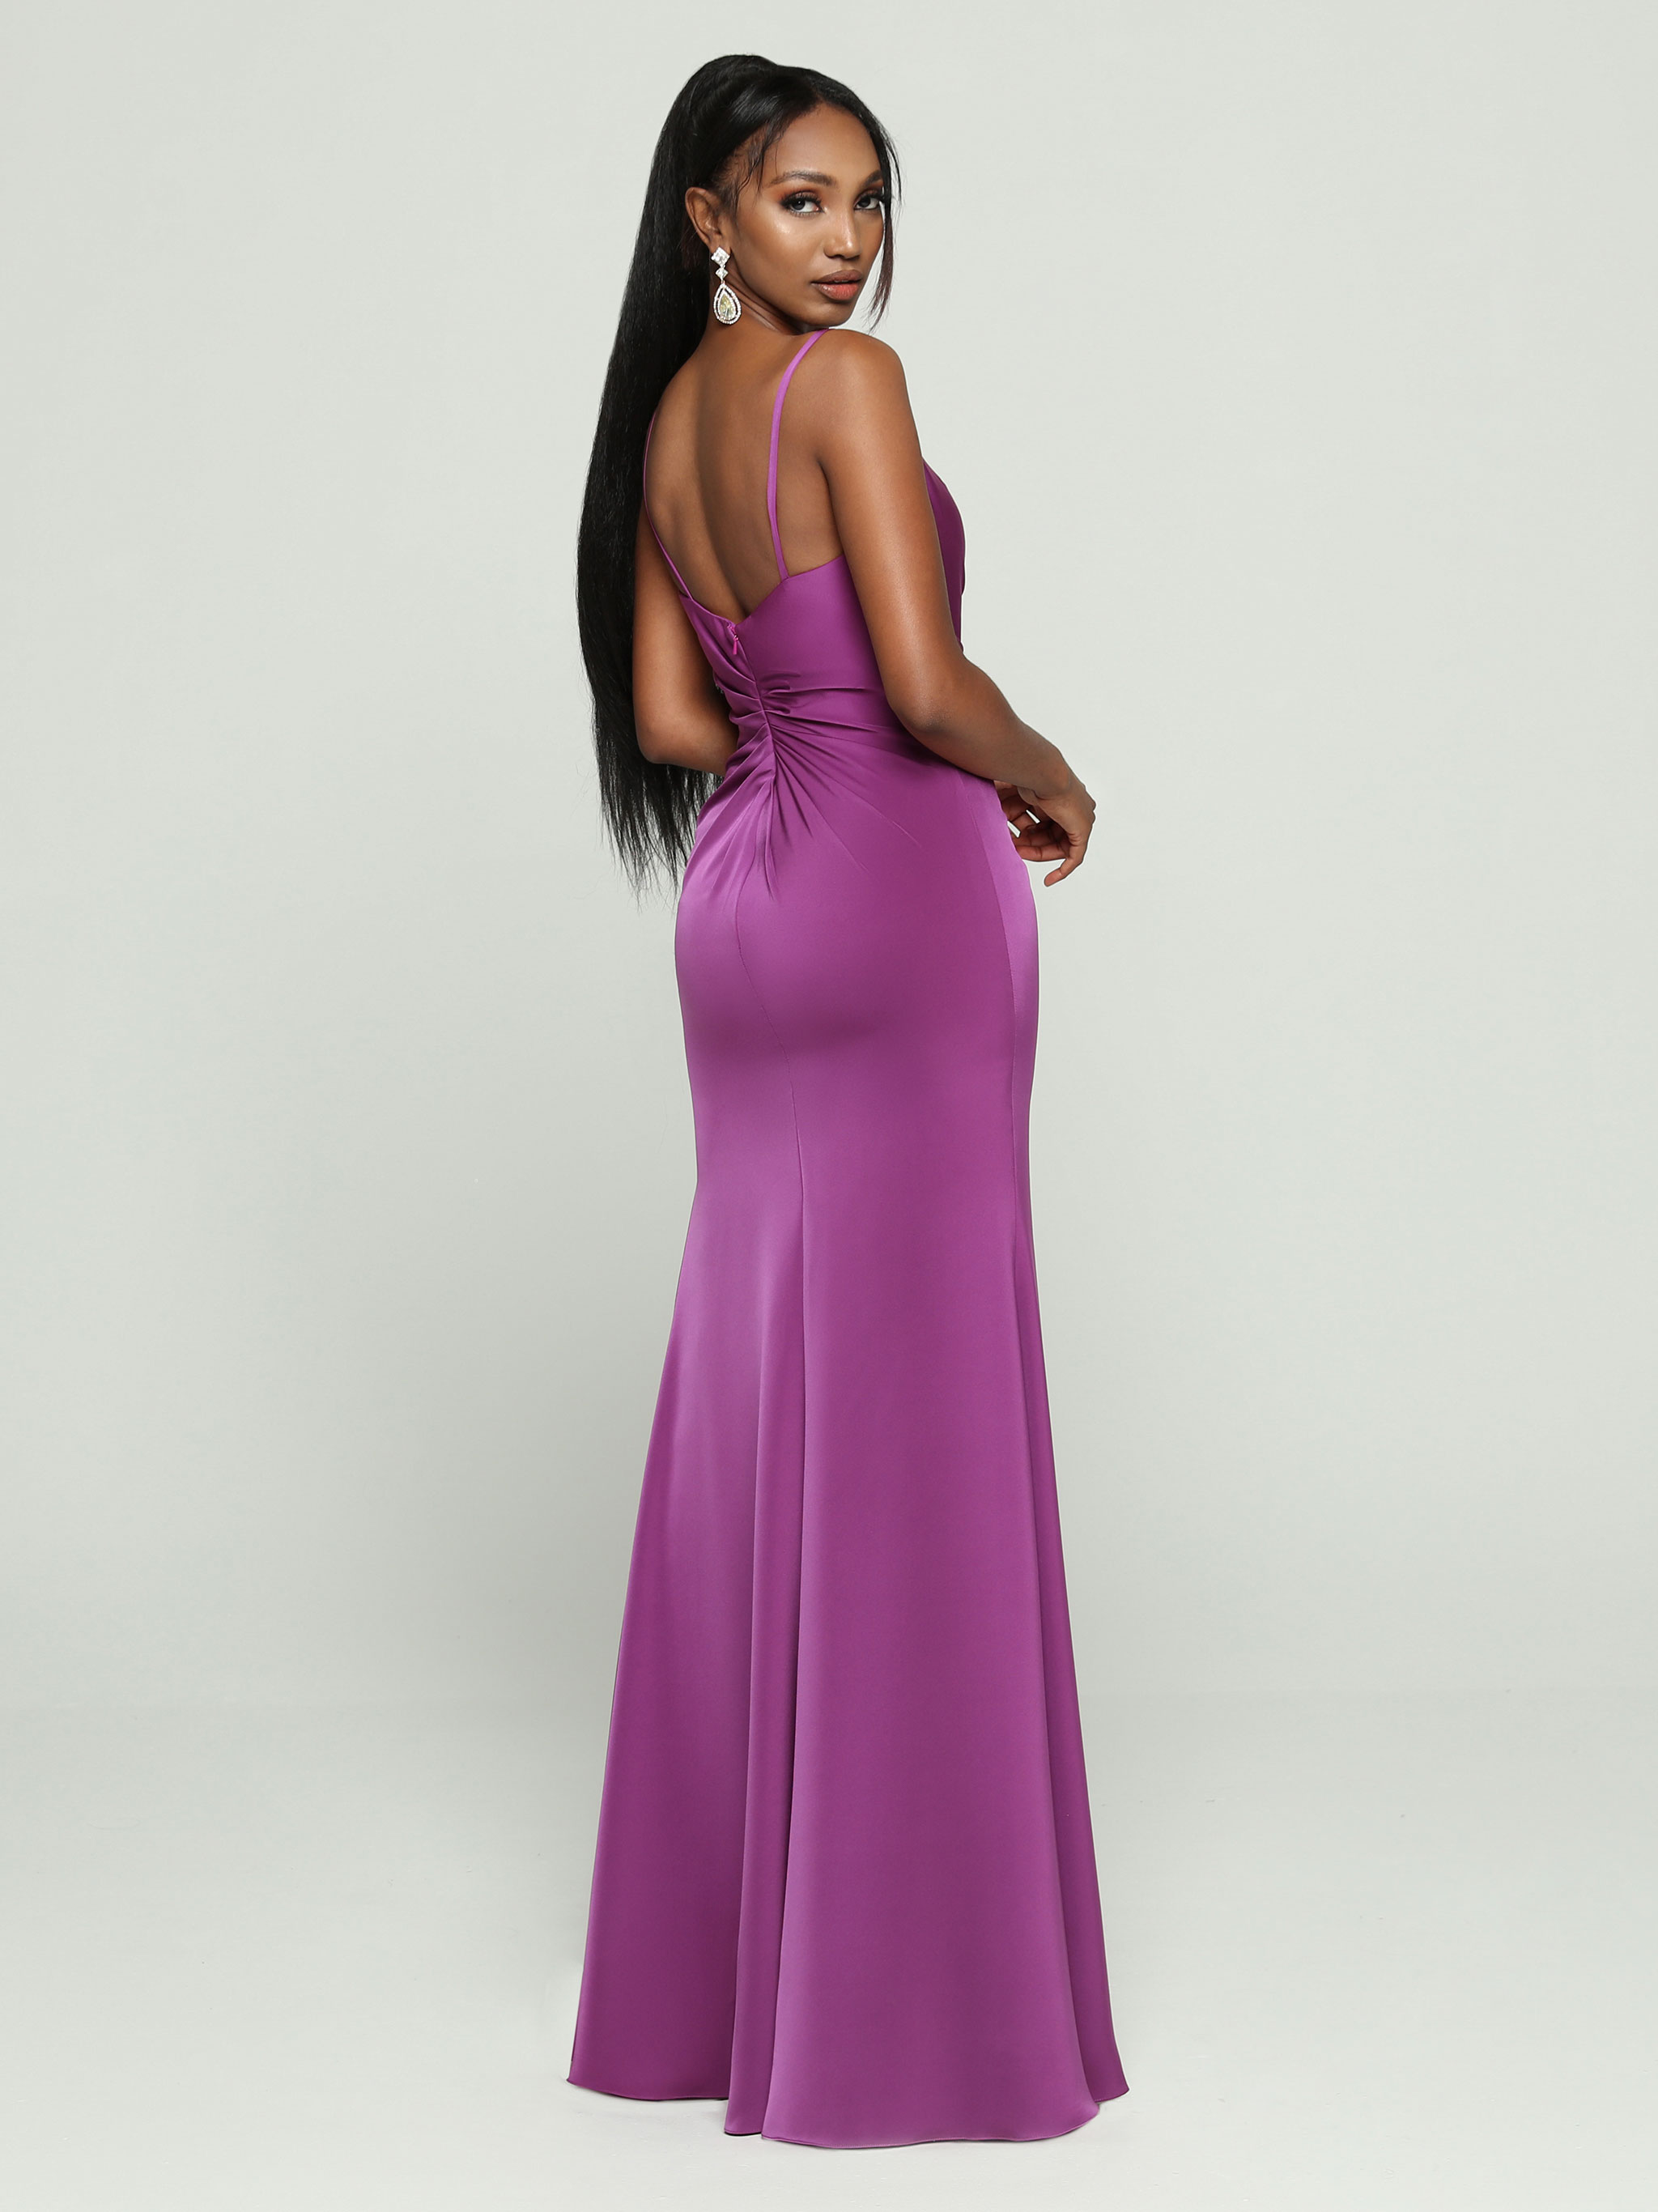 Image showing back view of style #60466